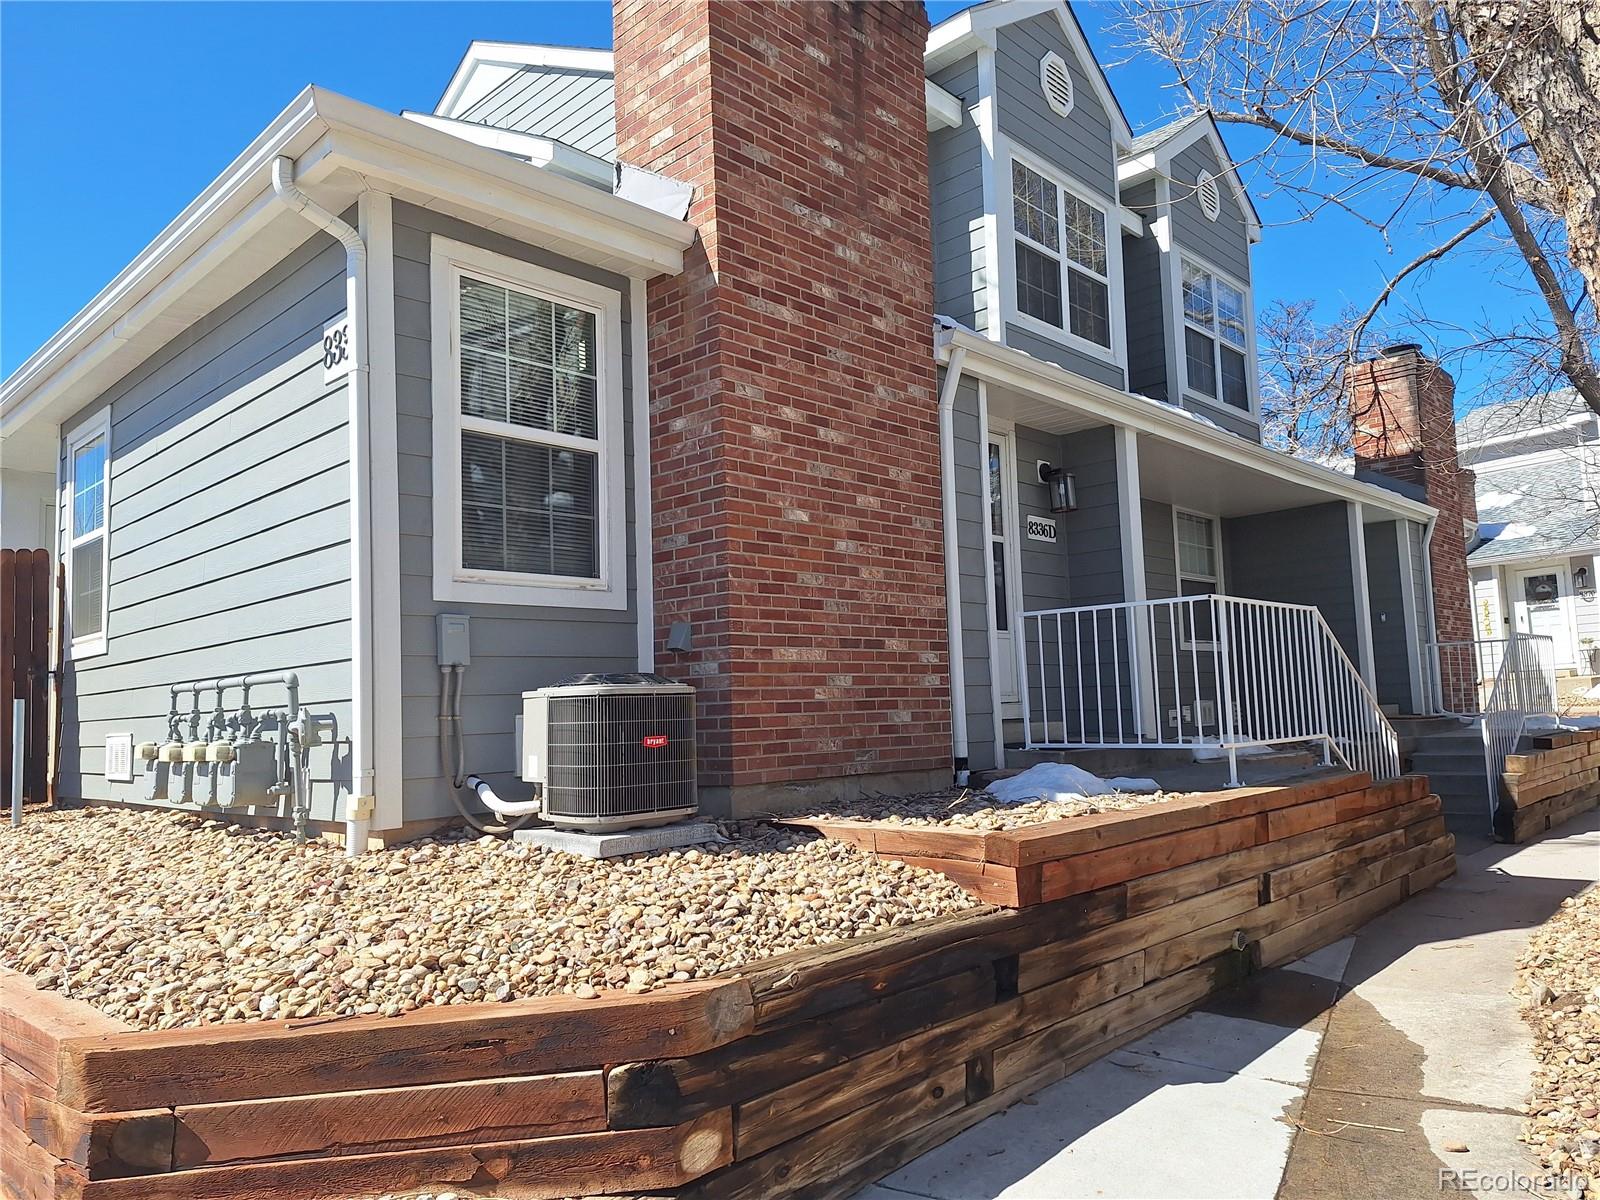 8336 W 87th Drive D, Arvada  MLS: 2650336 Beds: 2 Baths: 2 Price: $410,000